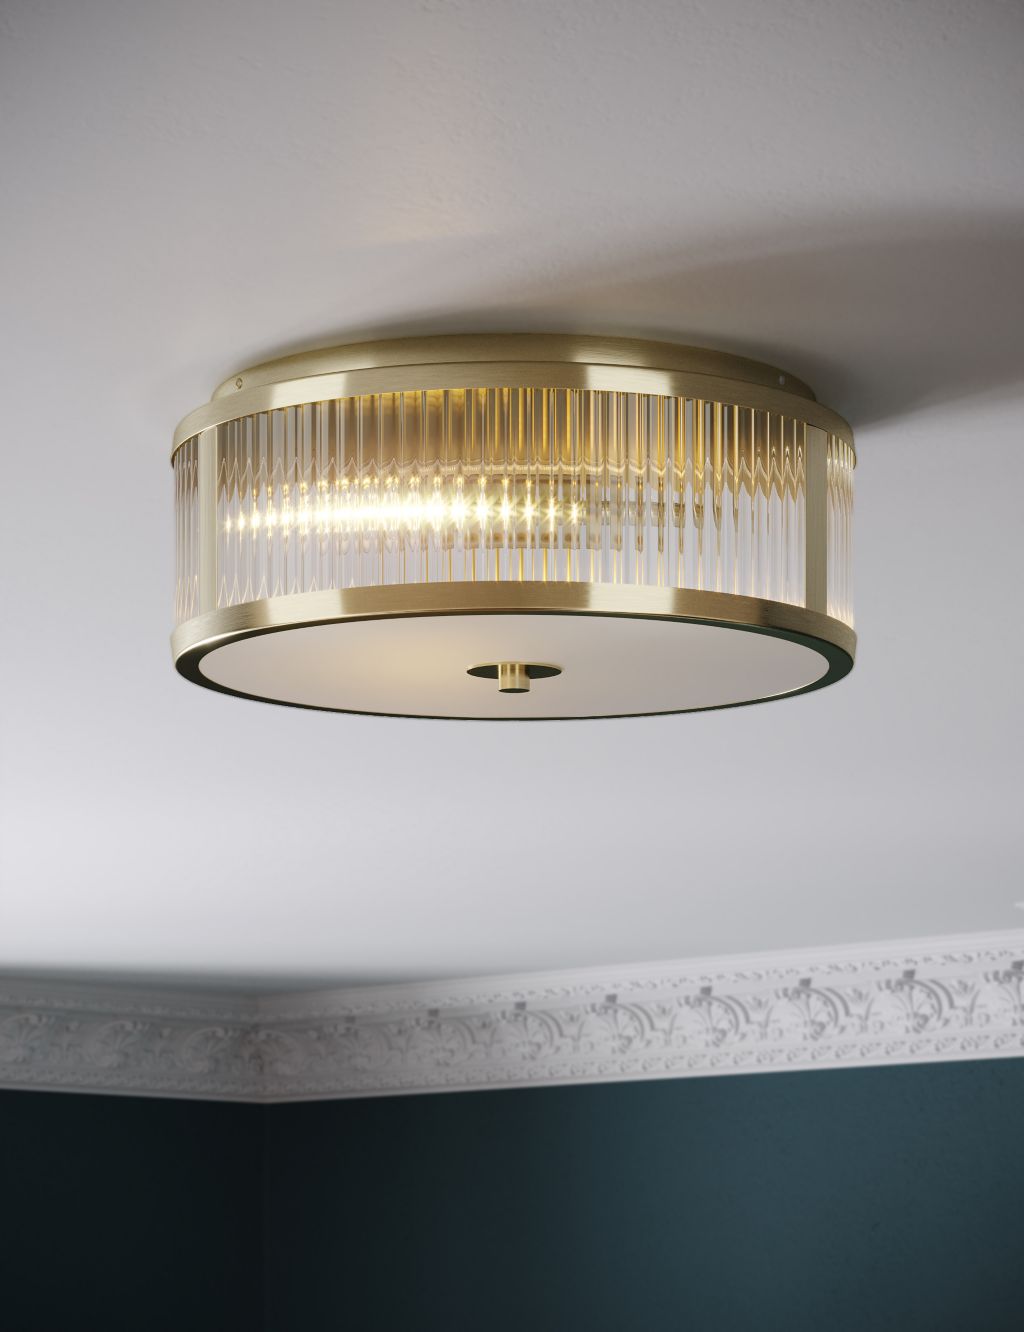 More Simple Ceiling Light Covers to Conquer Your Ceiling Cleavage